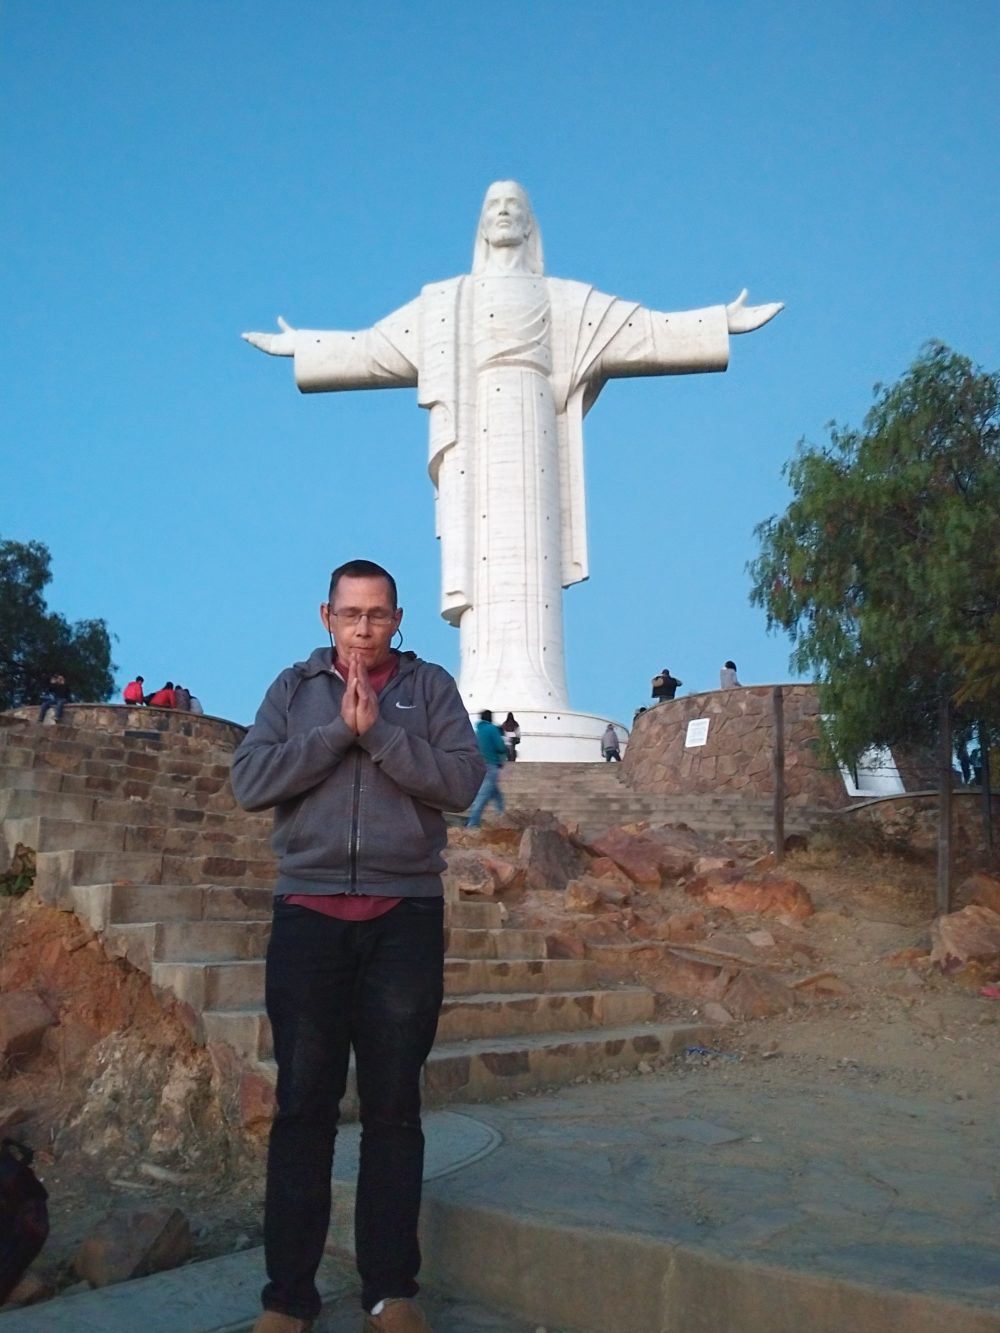 A male student wearing dark blue jeans, a red shirt, a gray Nike sweatshirt, brown shoes, and glasses with a string is holding his hands in prayer in front of the large, white Cristo de la Concordia statue of Jesus Christ in Cochabamba, Bolivia.